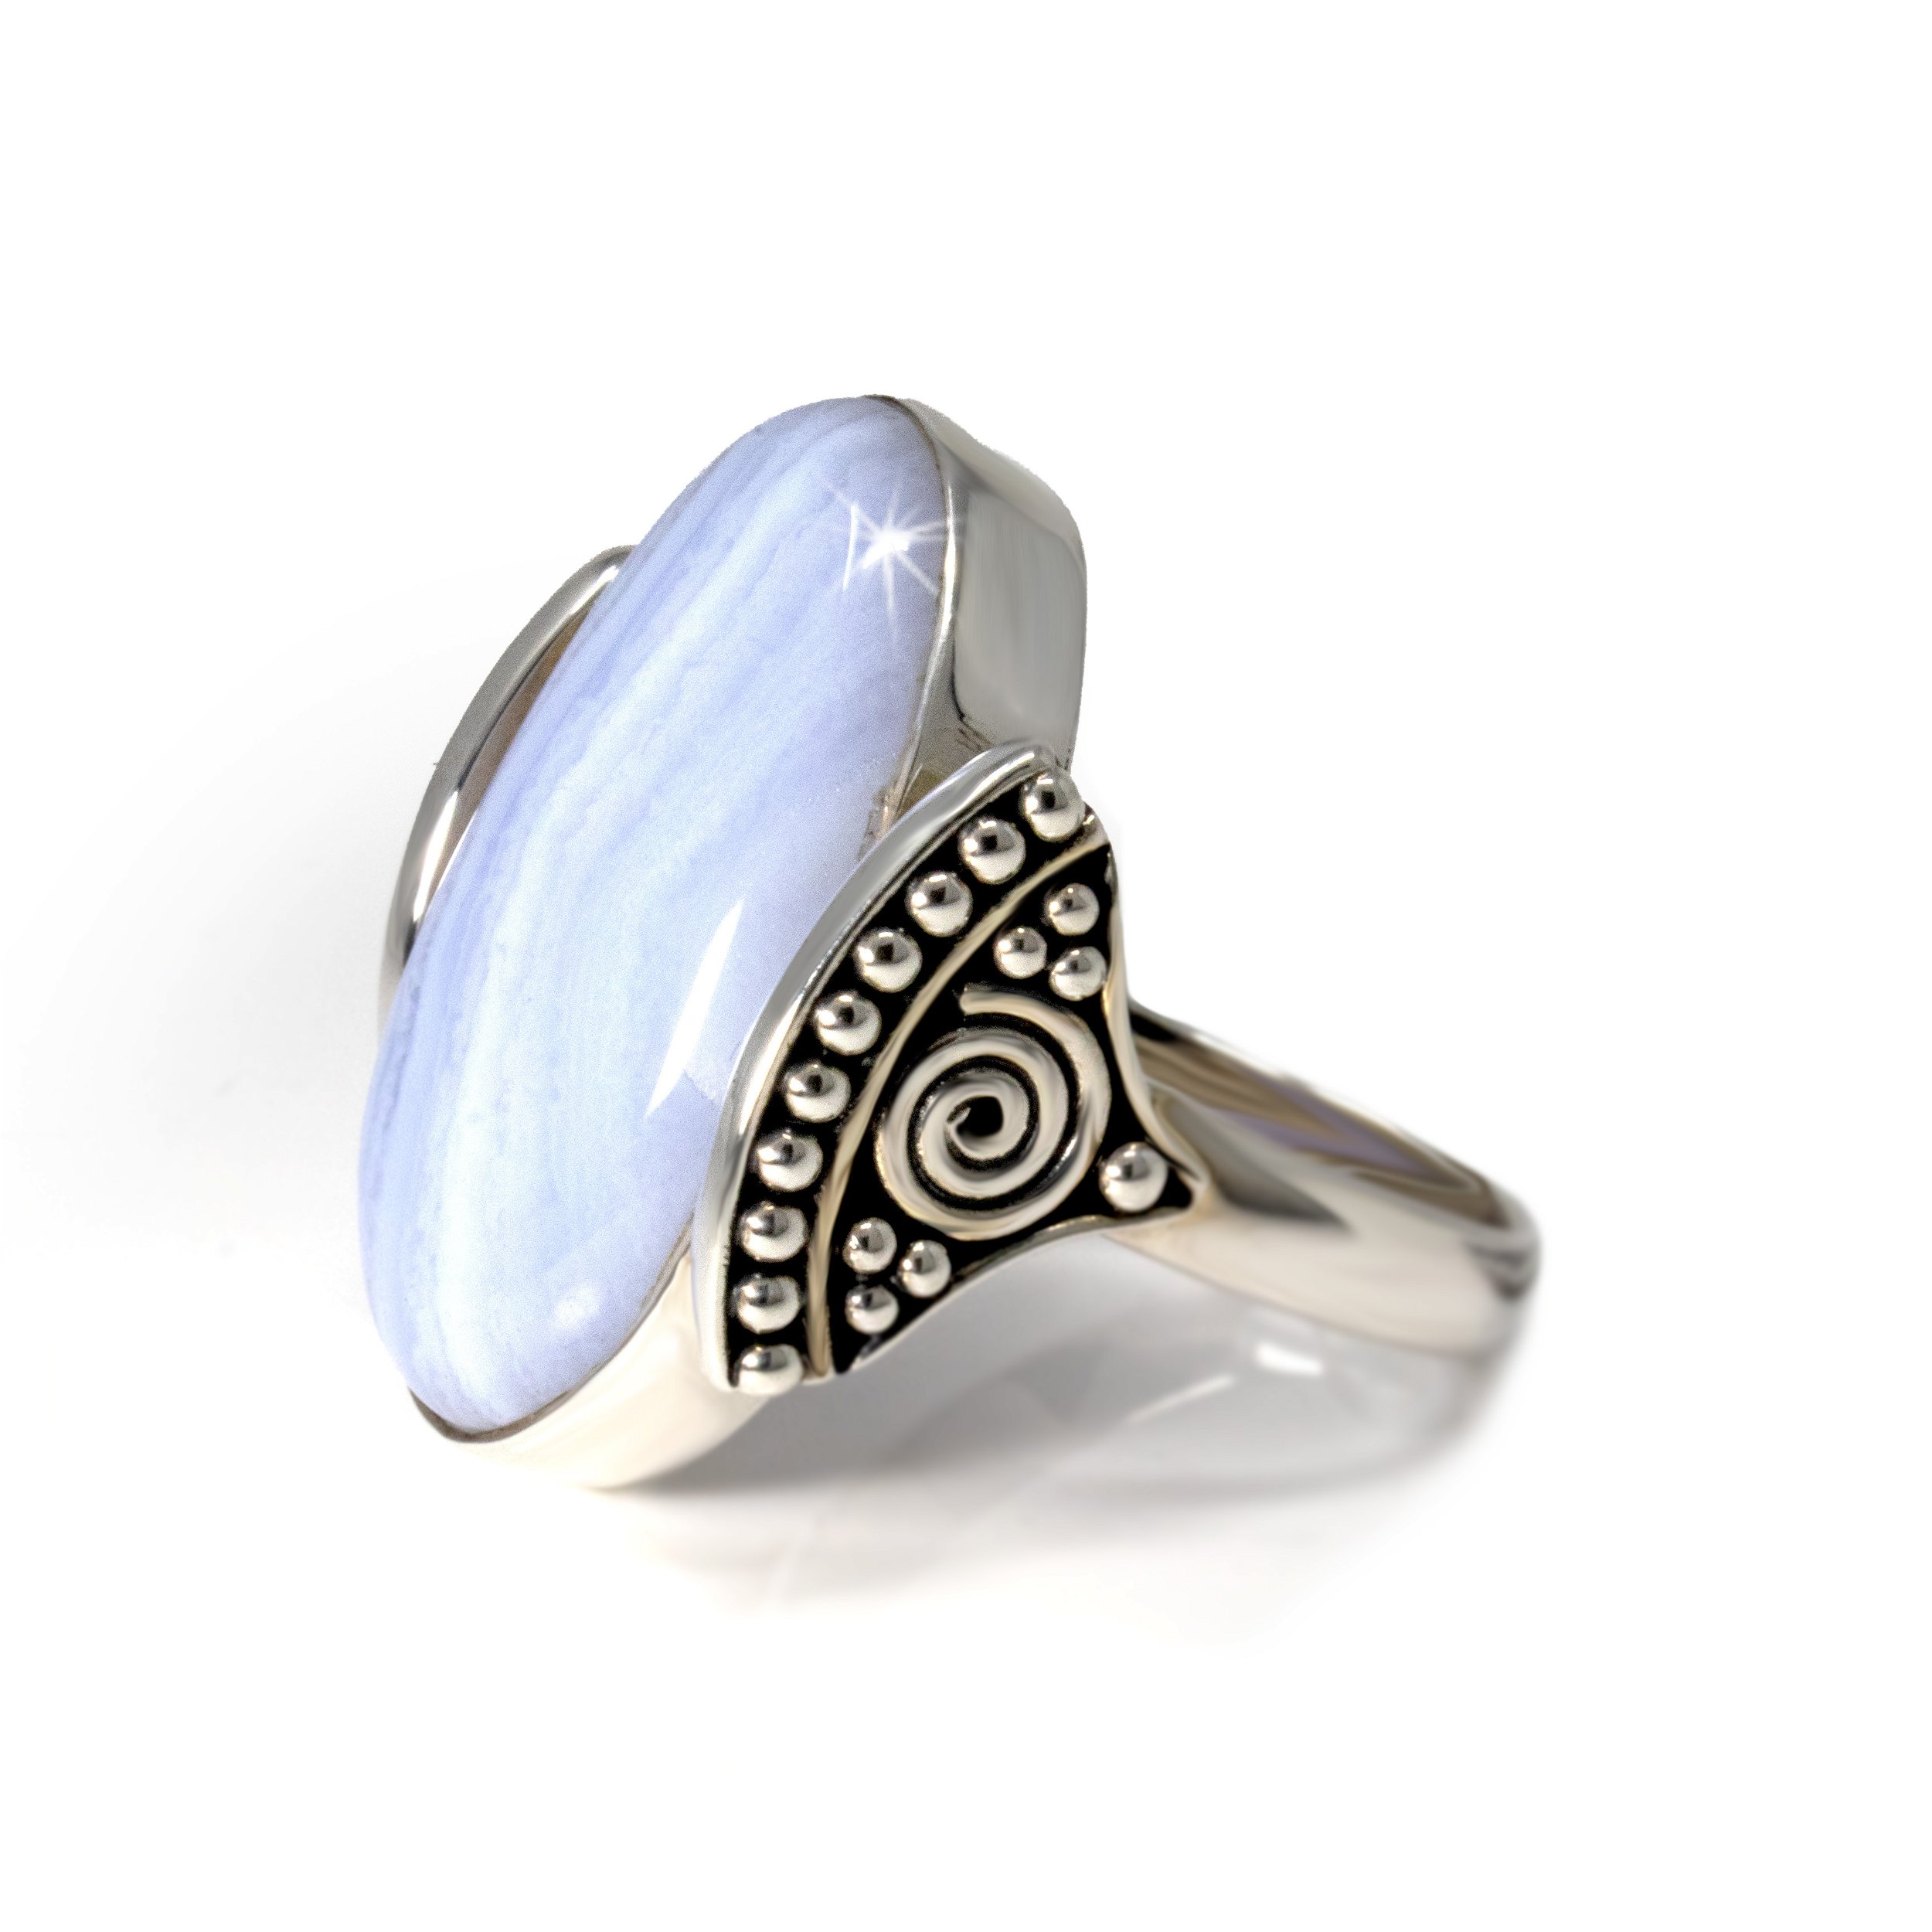 Blue Lace Agate Ring -Oval With Fan Design Sides Size 10